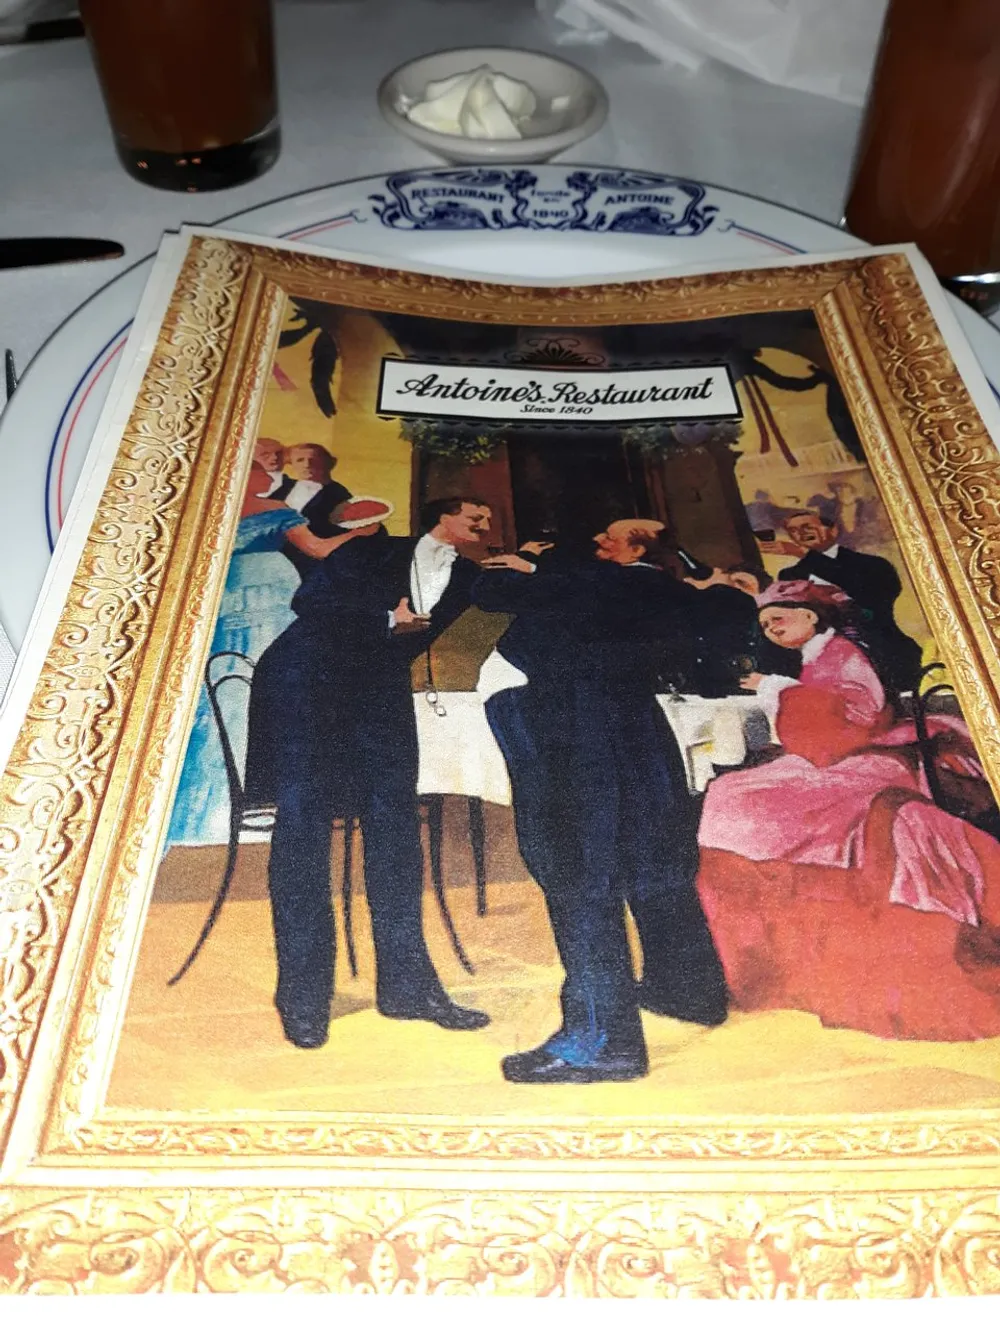 The image shows a menu cover from Antoines Restaurant featuring a colorful vintage illustration of elegantly dressed people dining with a plate bordered with the restaurants name in front of it and a glass of iced tea and a small bowl of butter behind it